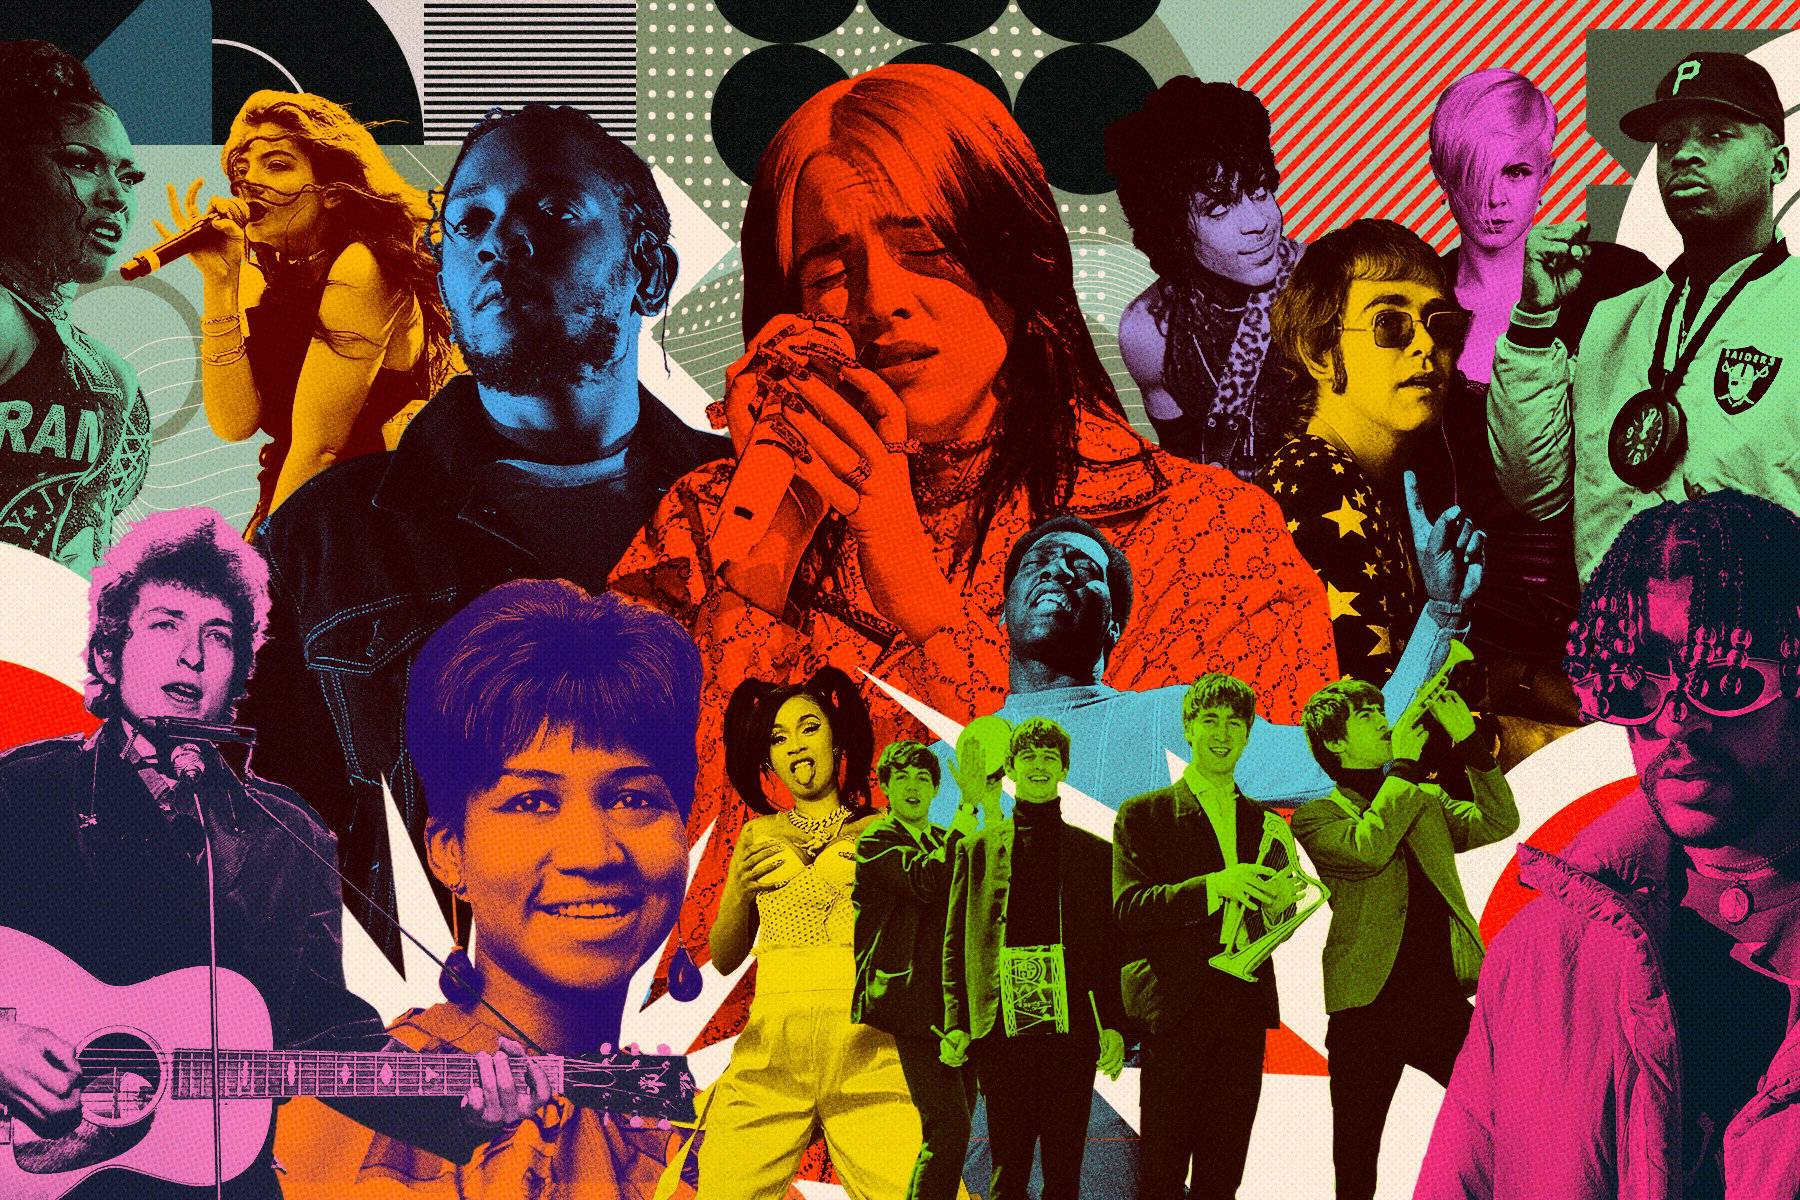 The 100 Best Rock and Roll Artists of All Time - The Greatest Rock Music,  the best classic rock — When It Was Cool - Pop Culture, Comics, Pro  Wrestling, Toys, TV, Movies, and Podcasts